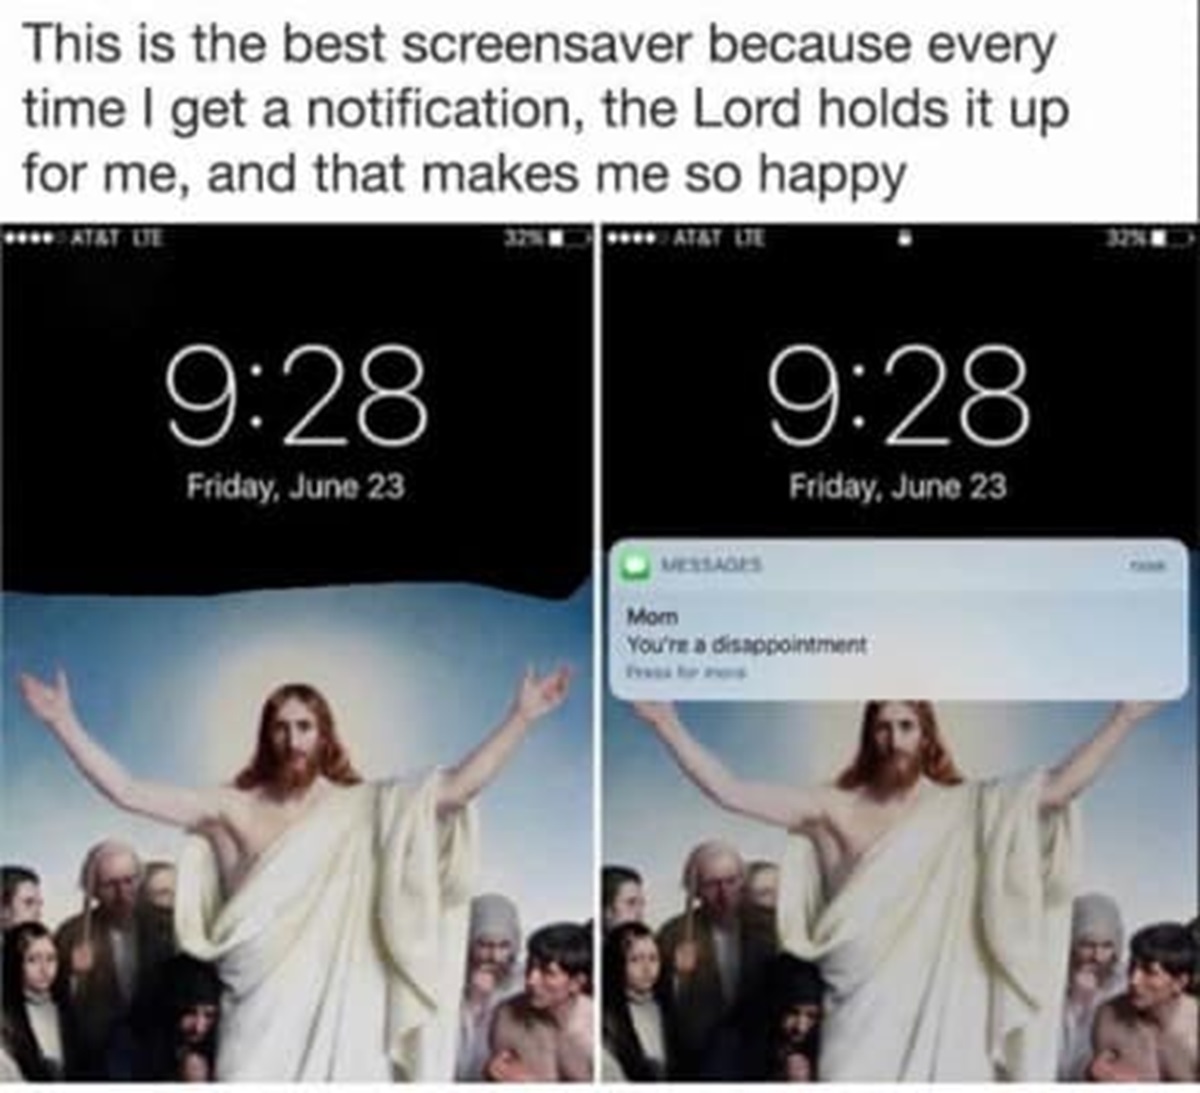 screensaver meme - This is the best screensaver because every time I get a notification, the Lord holds it up for me, and that makes me so happy At&T Le Friday, June 23 32% Mom At&T Lte Messages Friday, June 23 You're a disappointment 32%